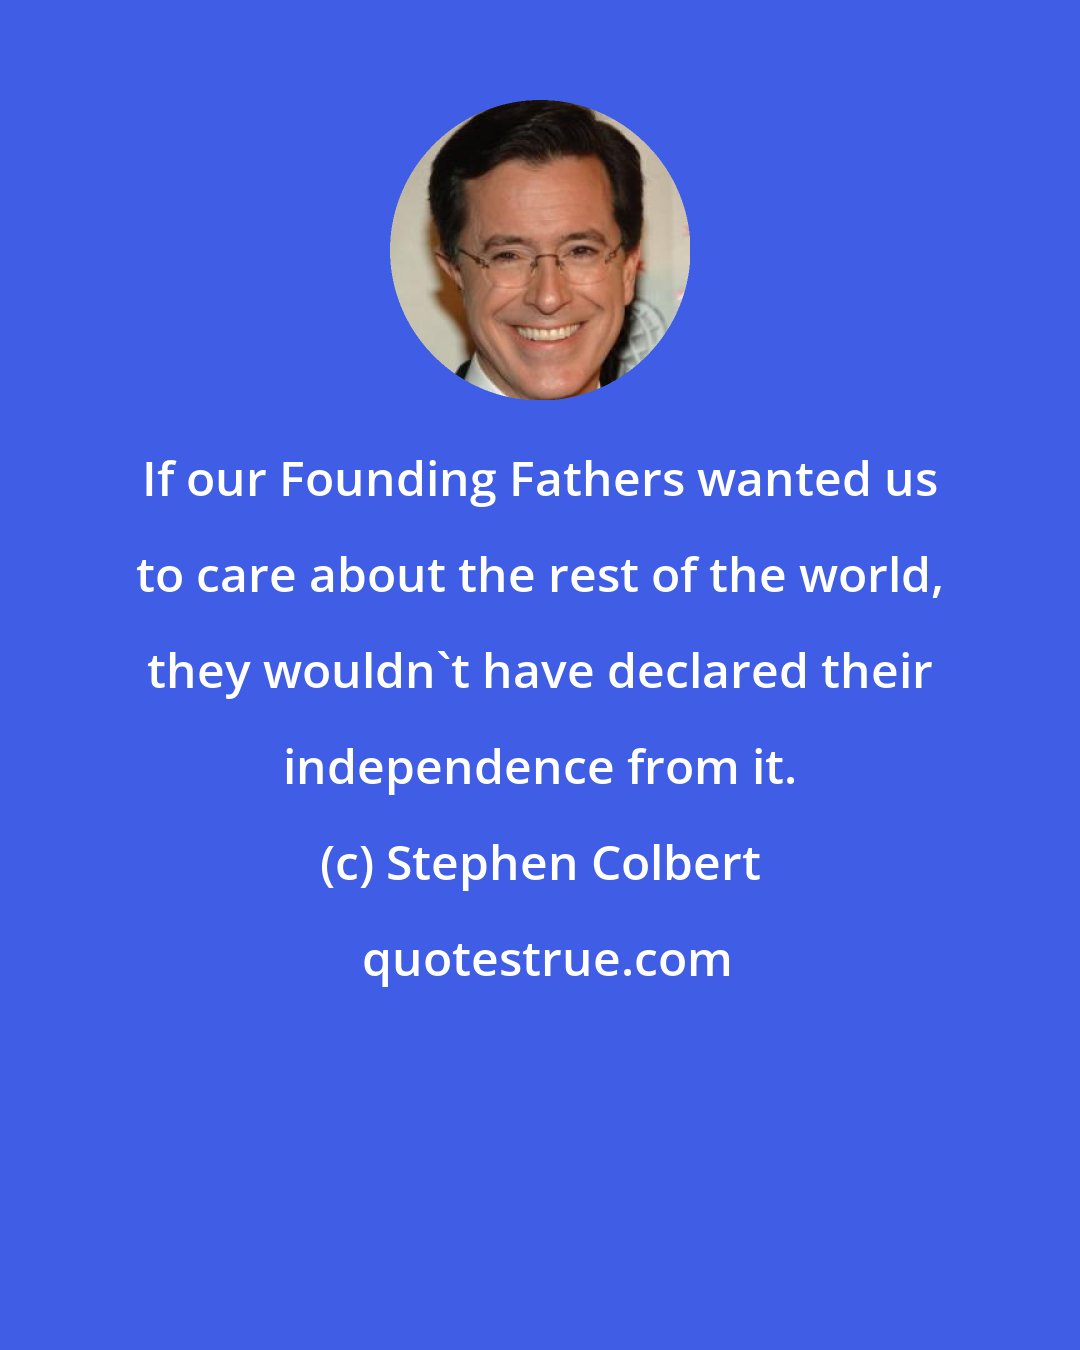 Stephen Colbert: If our Founding Fathers wanted us to care about the rest of the world, they wouldn't have declared their independence from it.